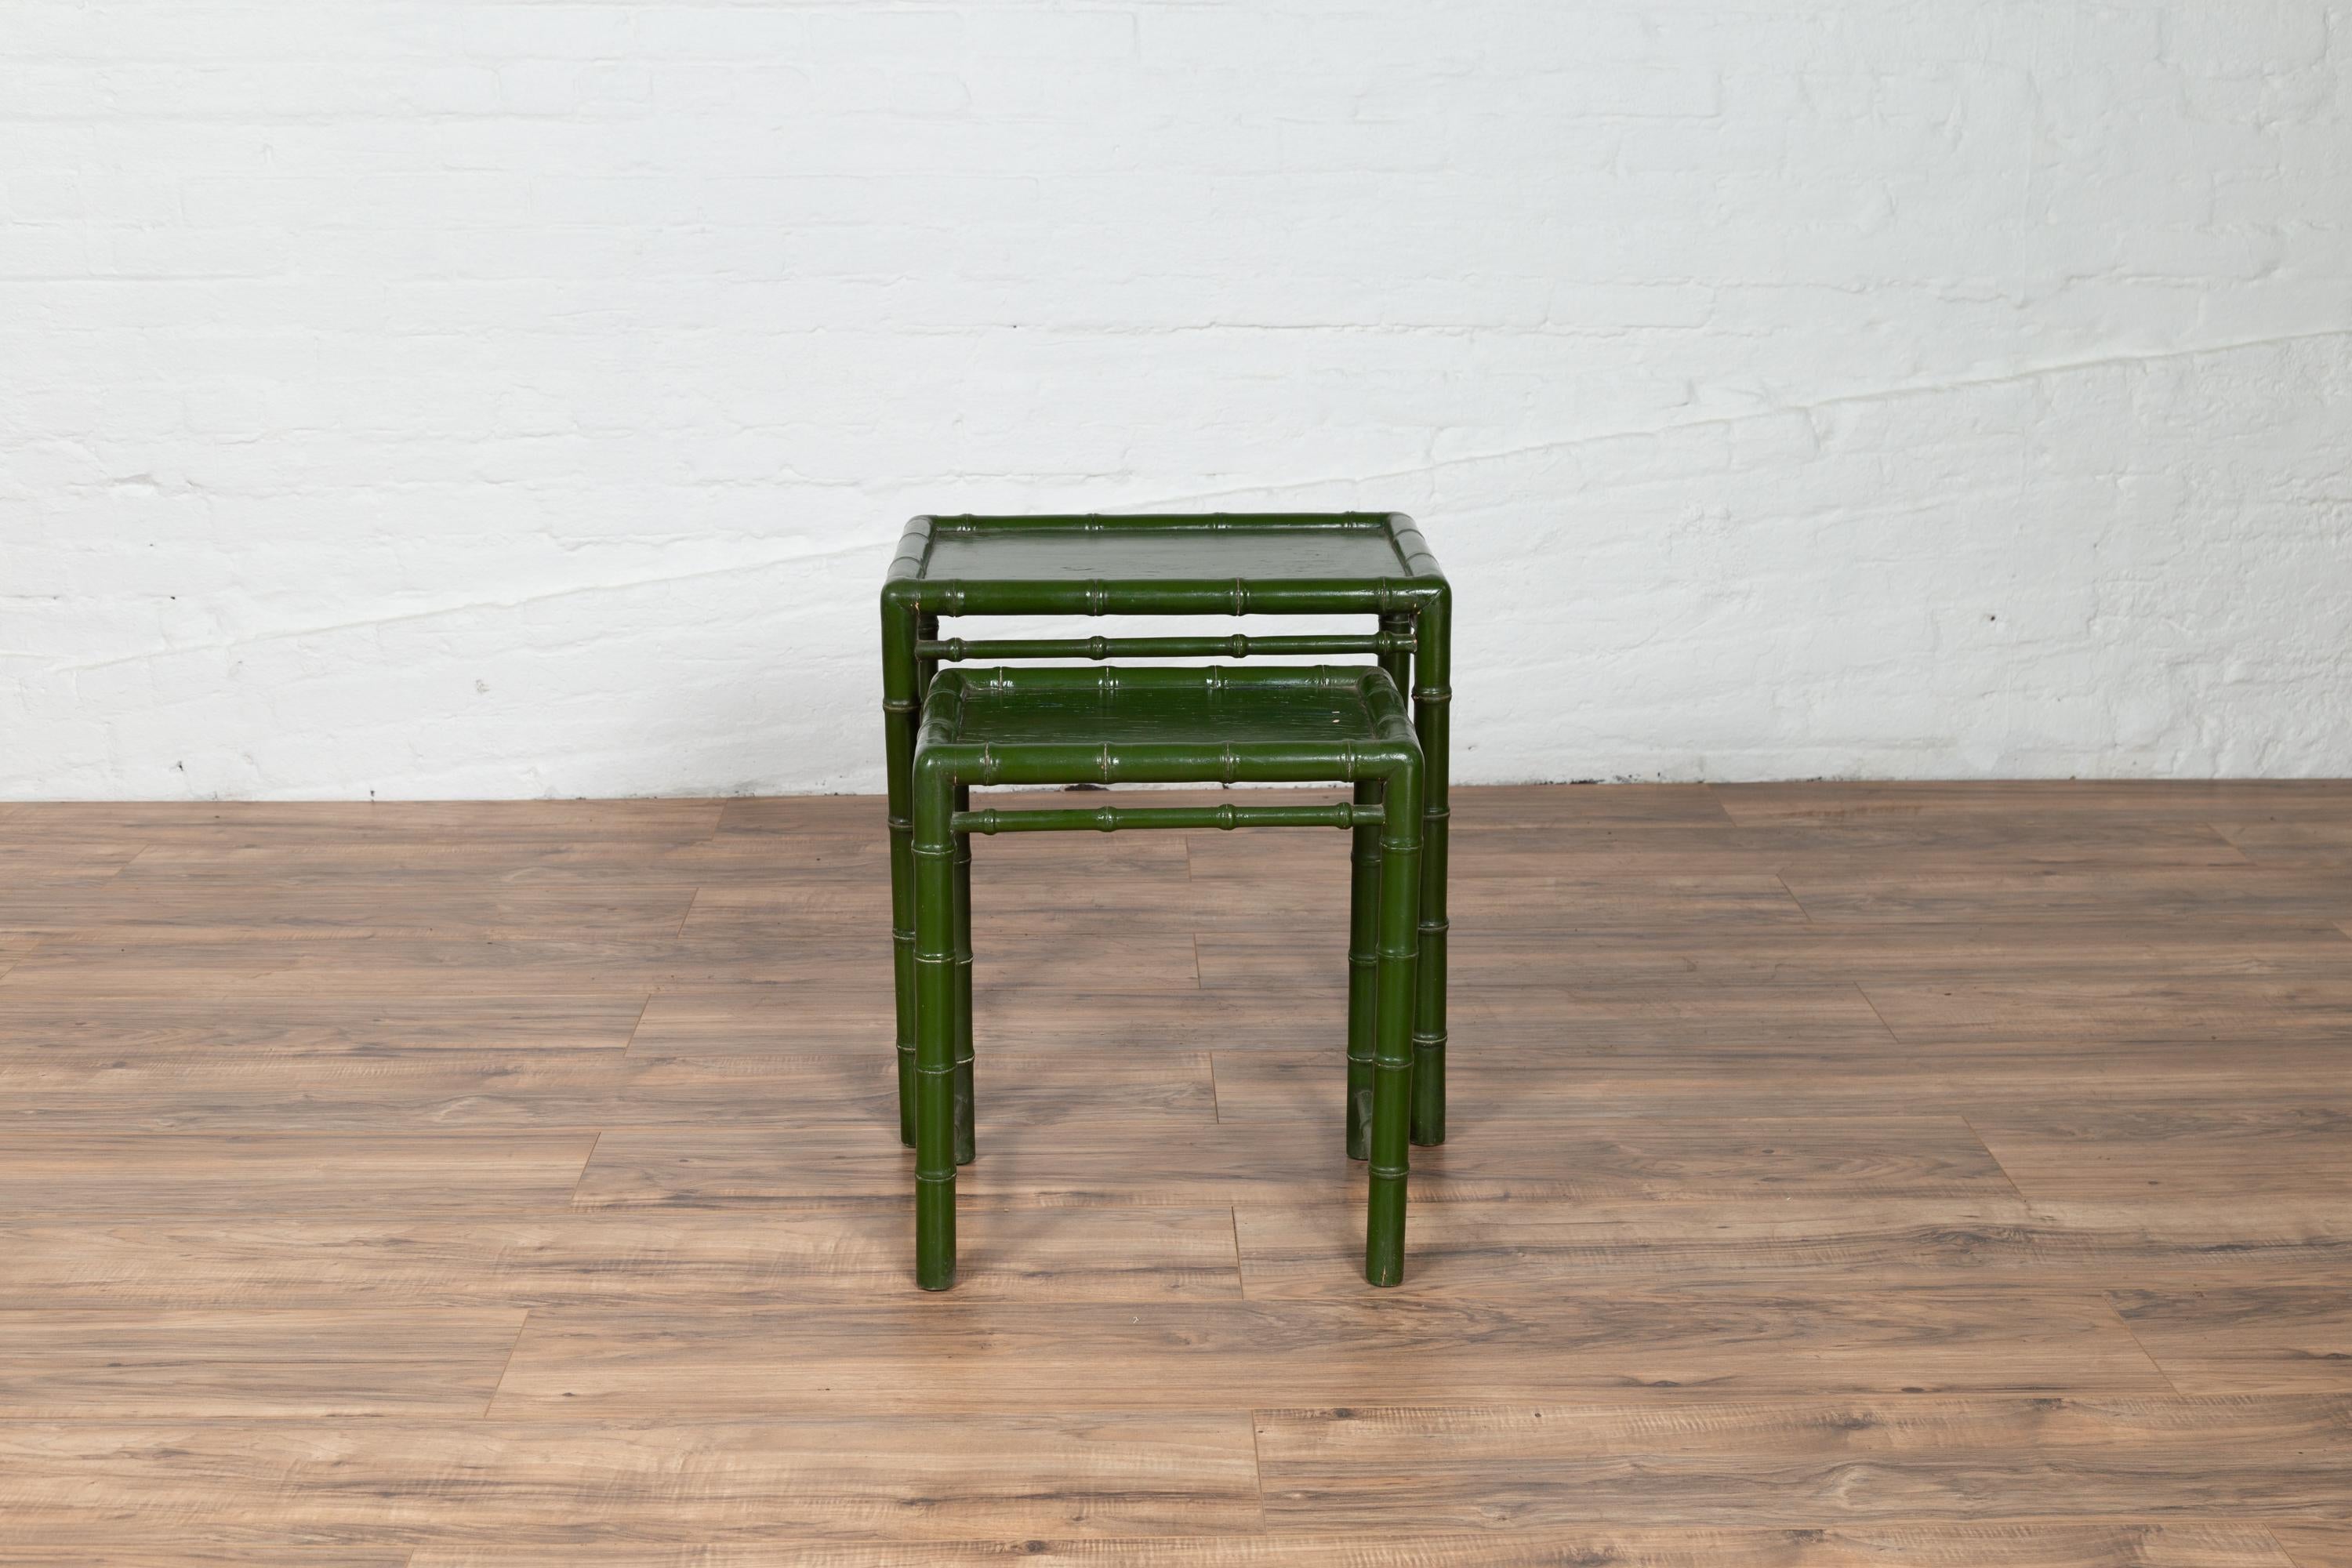 A set of two Chinese vintage bamboo nesting tables from the mid-20th century, with green lacquered finish and side stretchers. Born in China during the midcentury period, each of these two nesting tables features a bamboo structure, supporting a